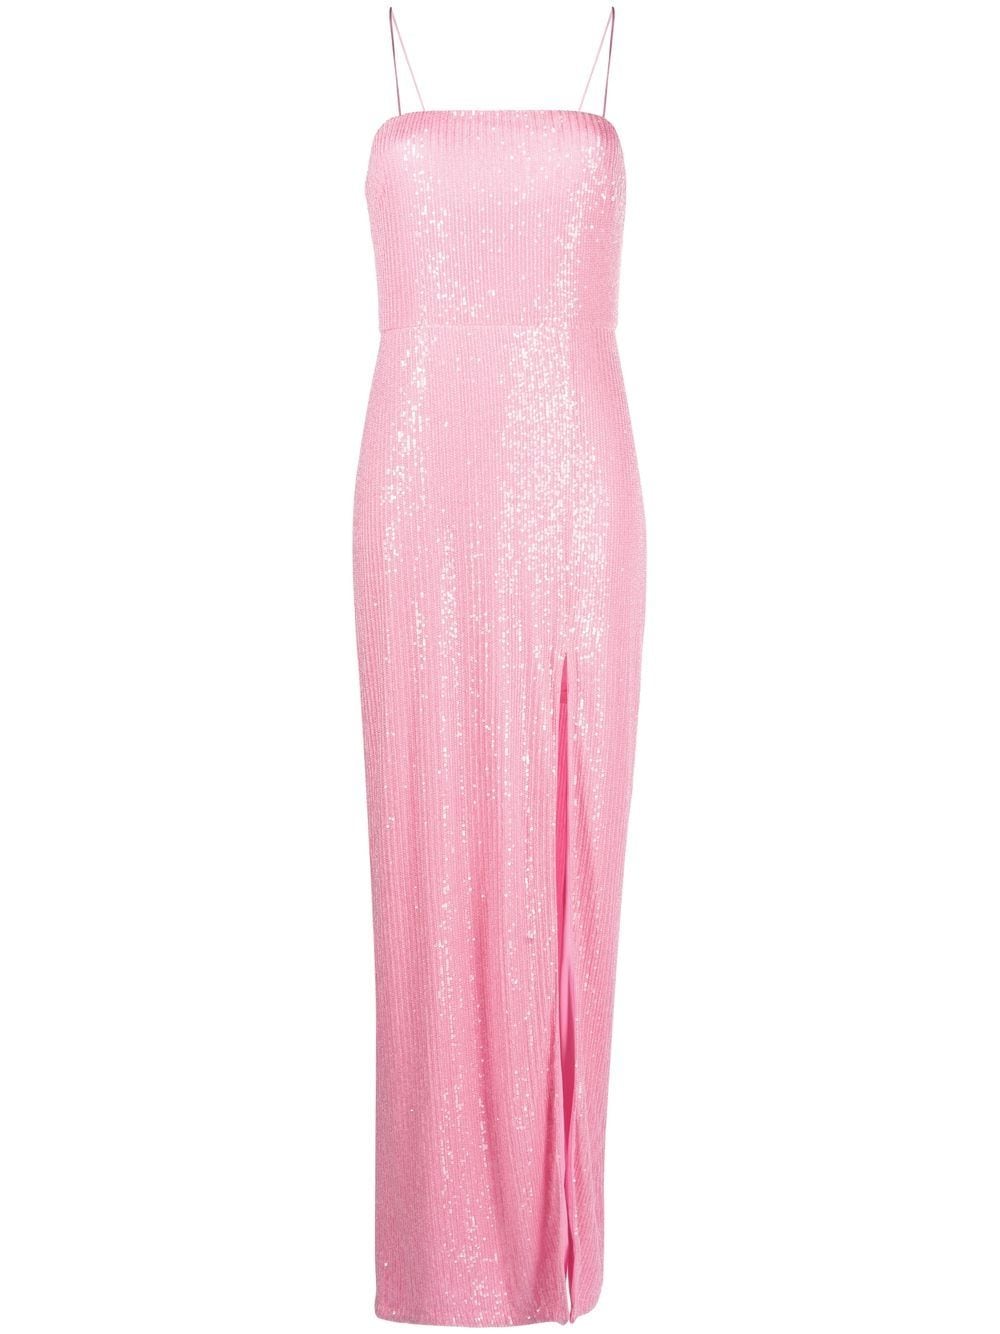 ROTATE sequin-embellished maxi dress - Pink